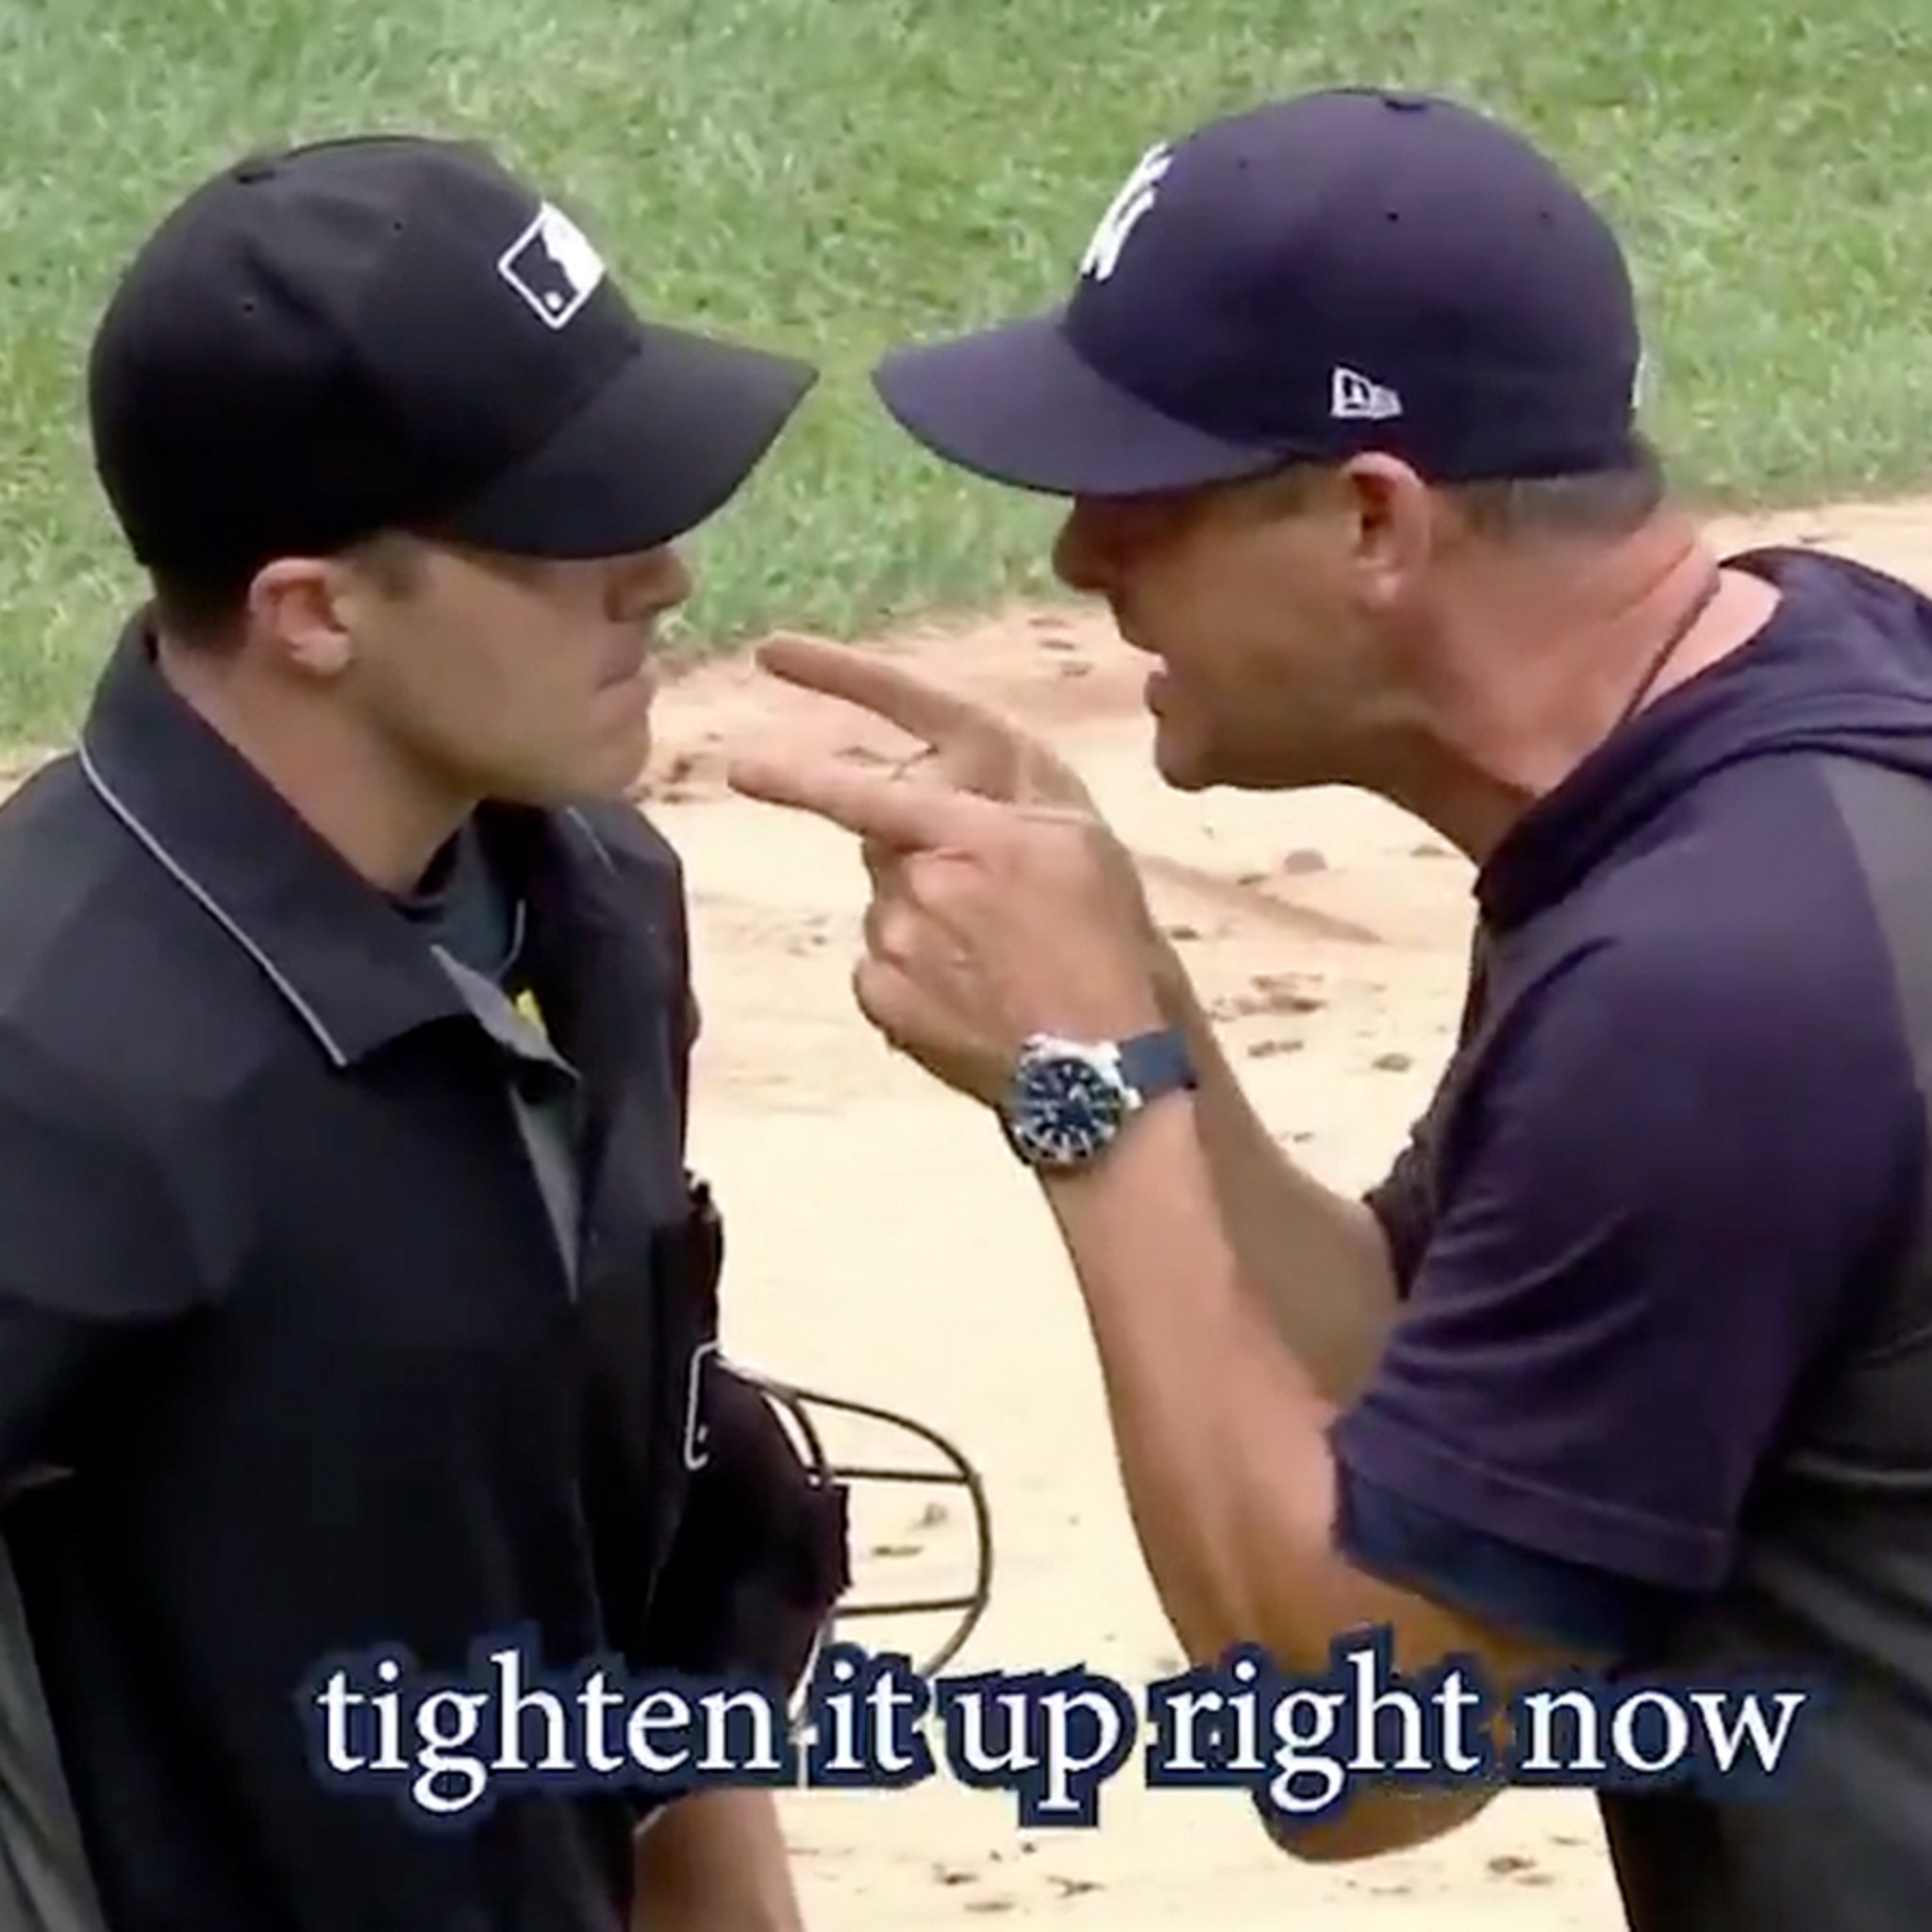 My Guys Are F------ Savages': Aaron Boone's Tirade Caught on Hot Mics